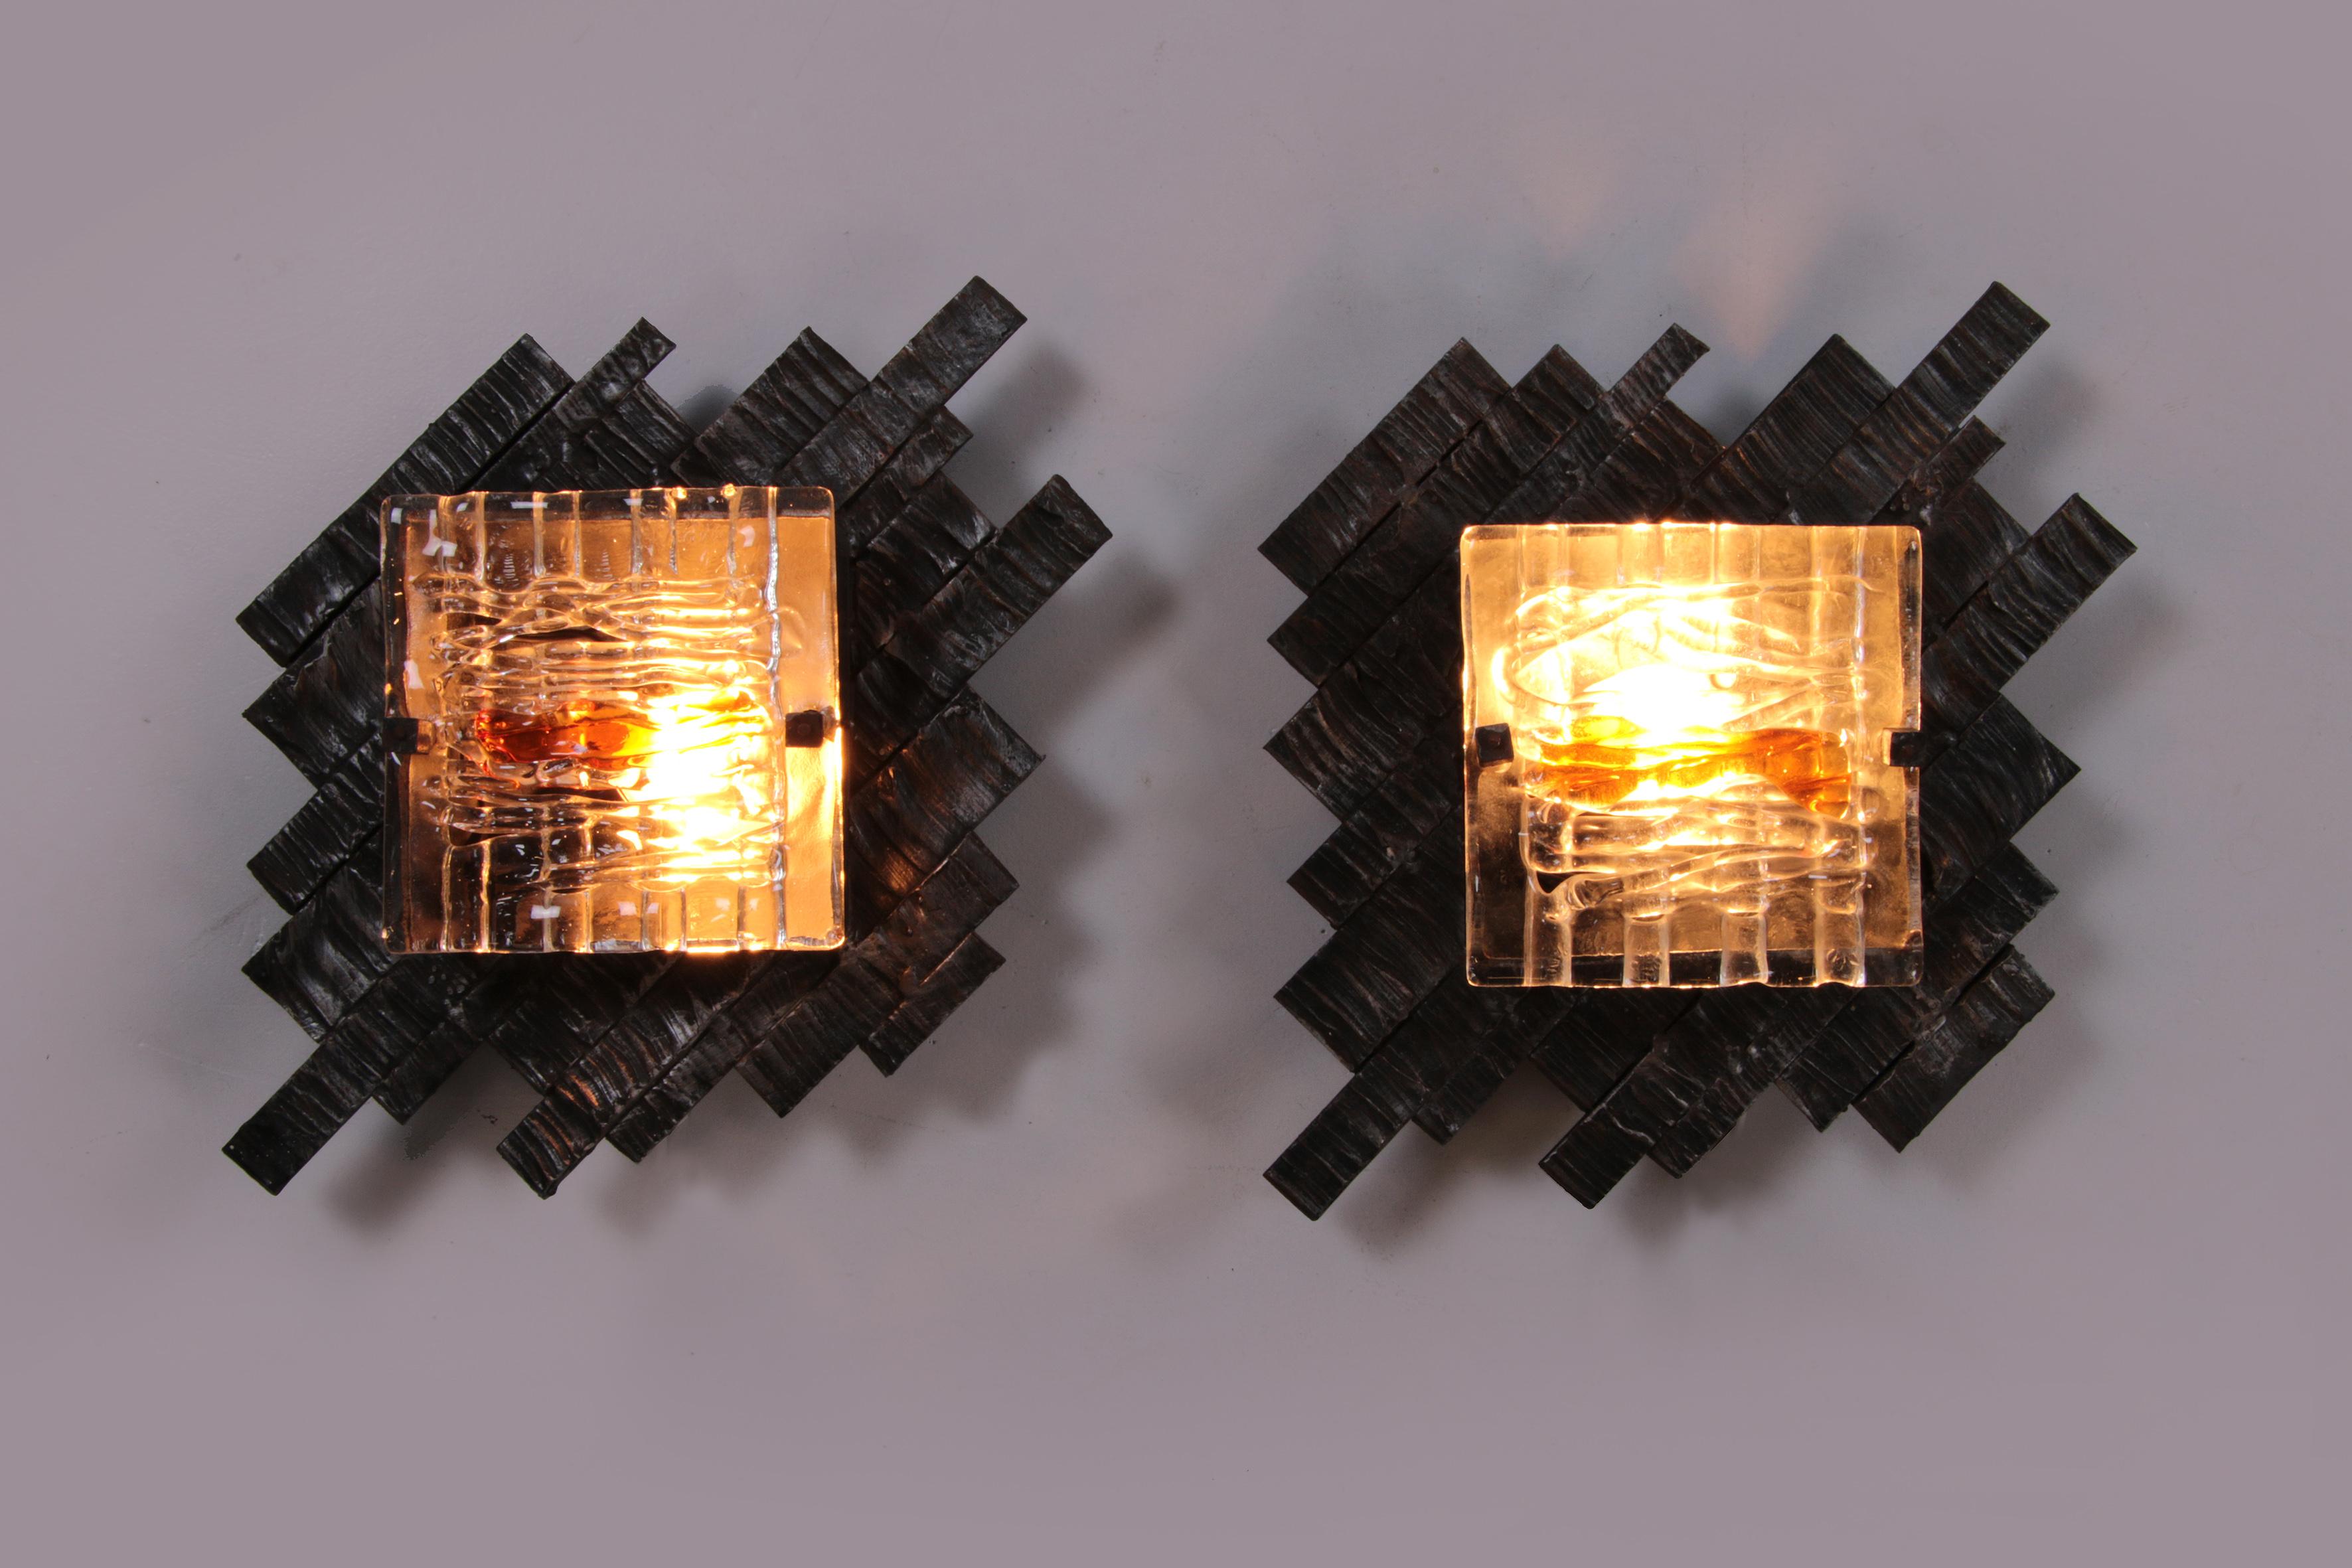 Pair of Brutalist Wall Lamps in Murano Glass by Albano Poli for Poliarte, 1970s For Sale 3